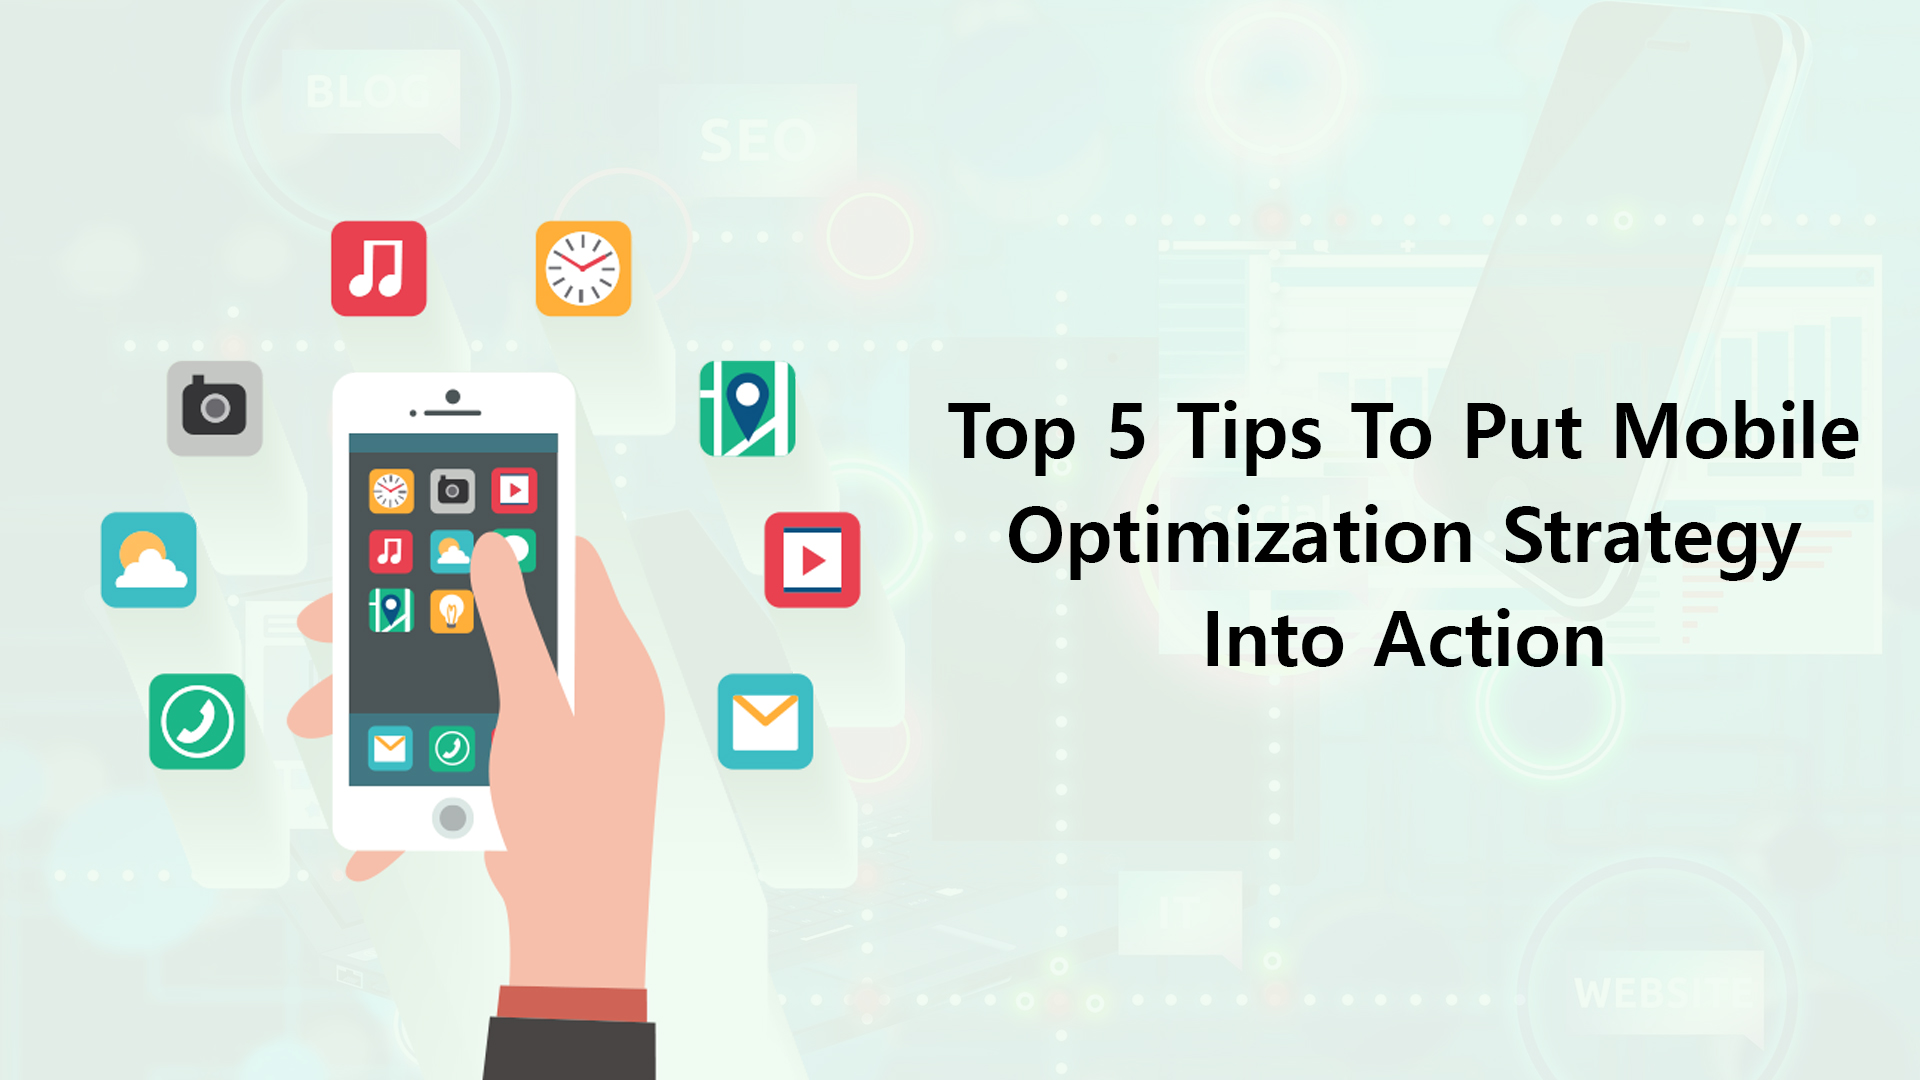 Top 5 Tips To Put Mobile Optimization Strategy Into Action